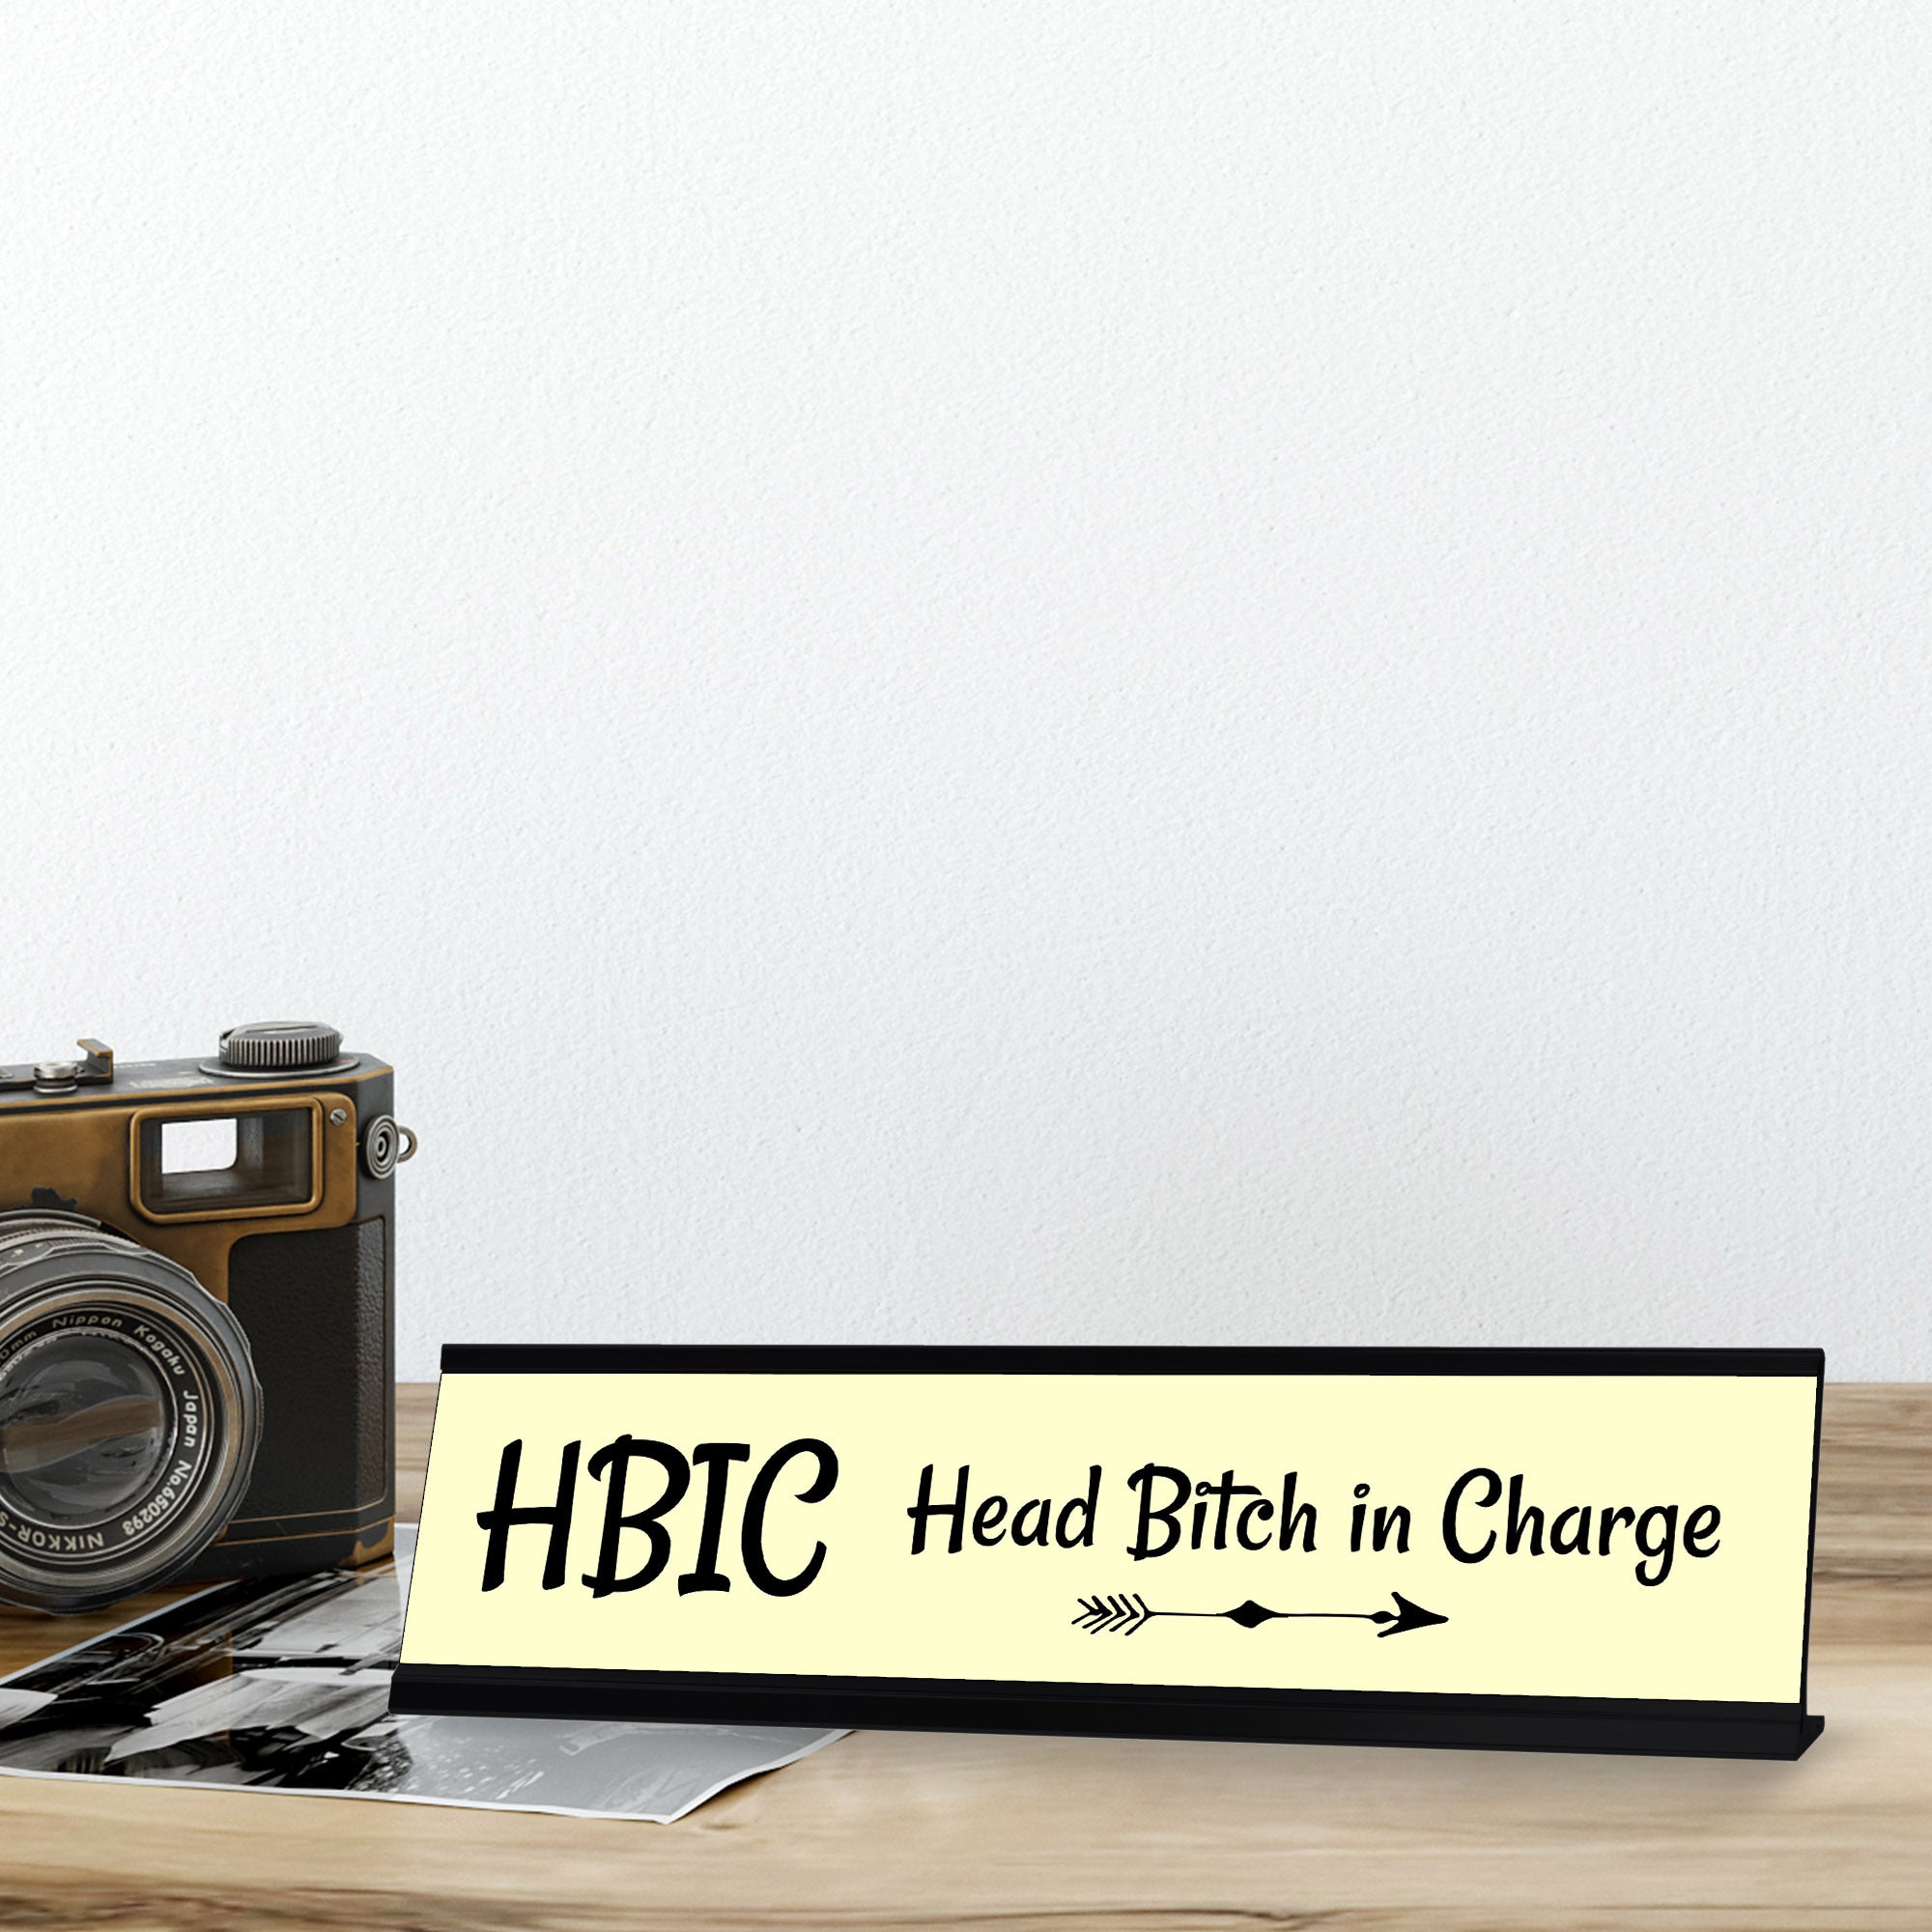 HBIC Head Bitch in Charge, Yellow Arrows Desk Sign (2 x 8")